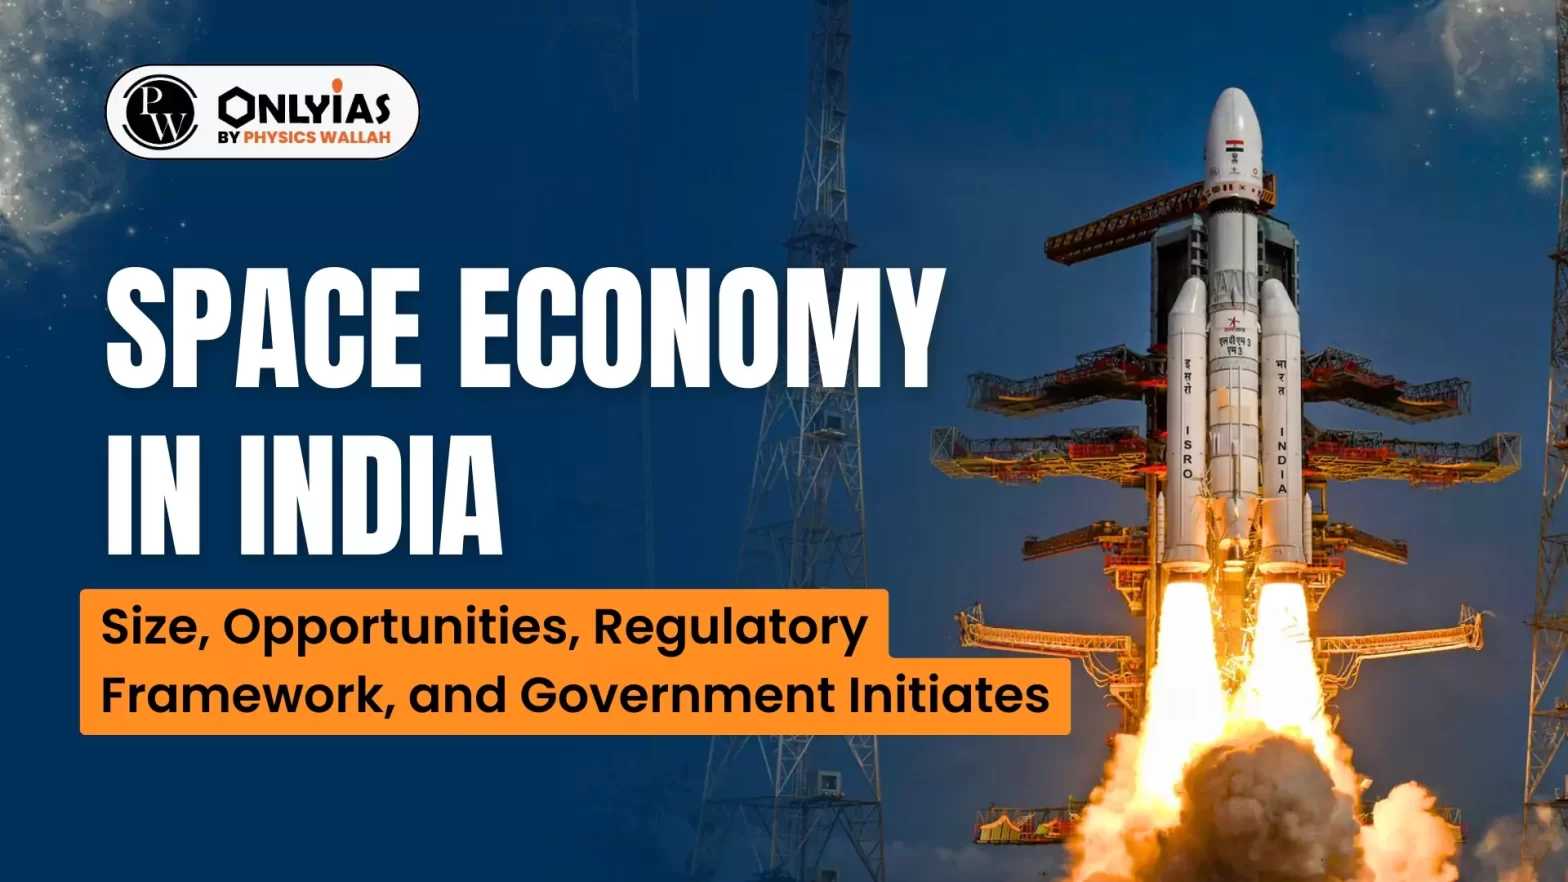 Space Economy in India: Size, Opportunities, Regulatory Framework, and Government Initiates